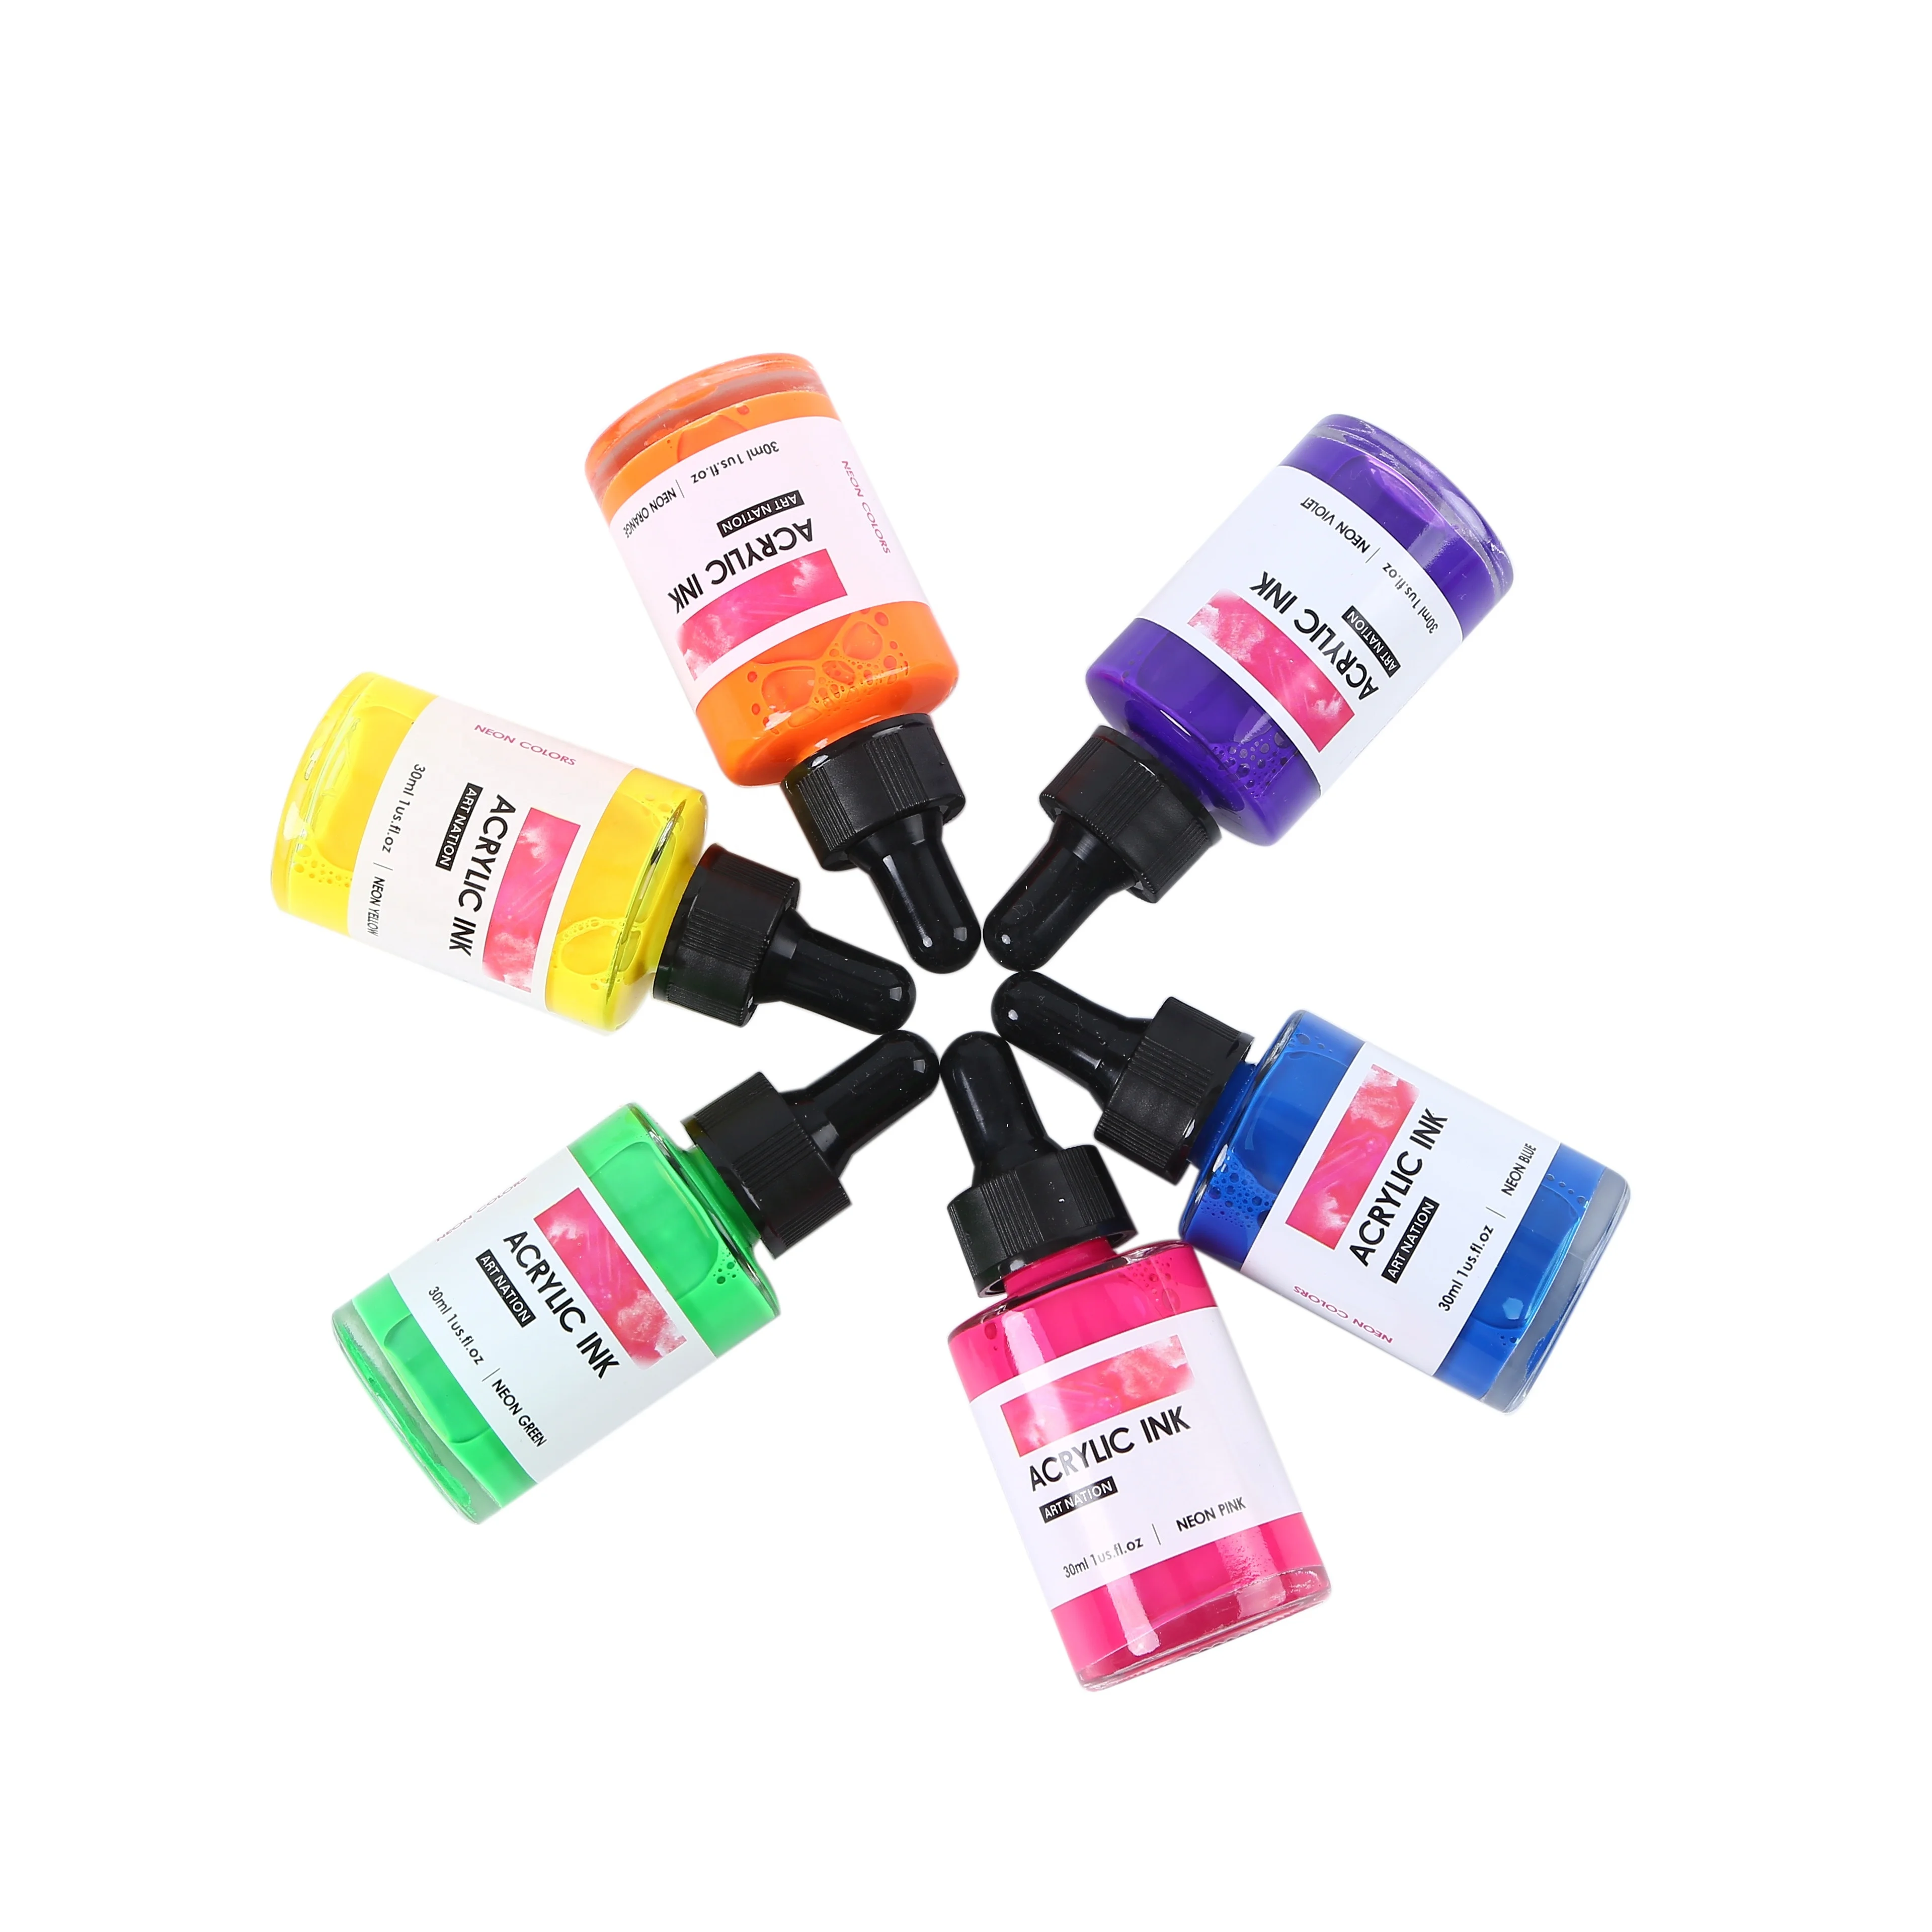 Buy acrylic inks for artists Online in Morocco at Low Prices at desertcart